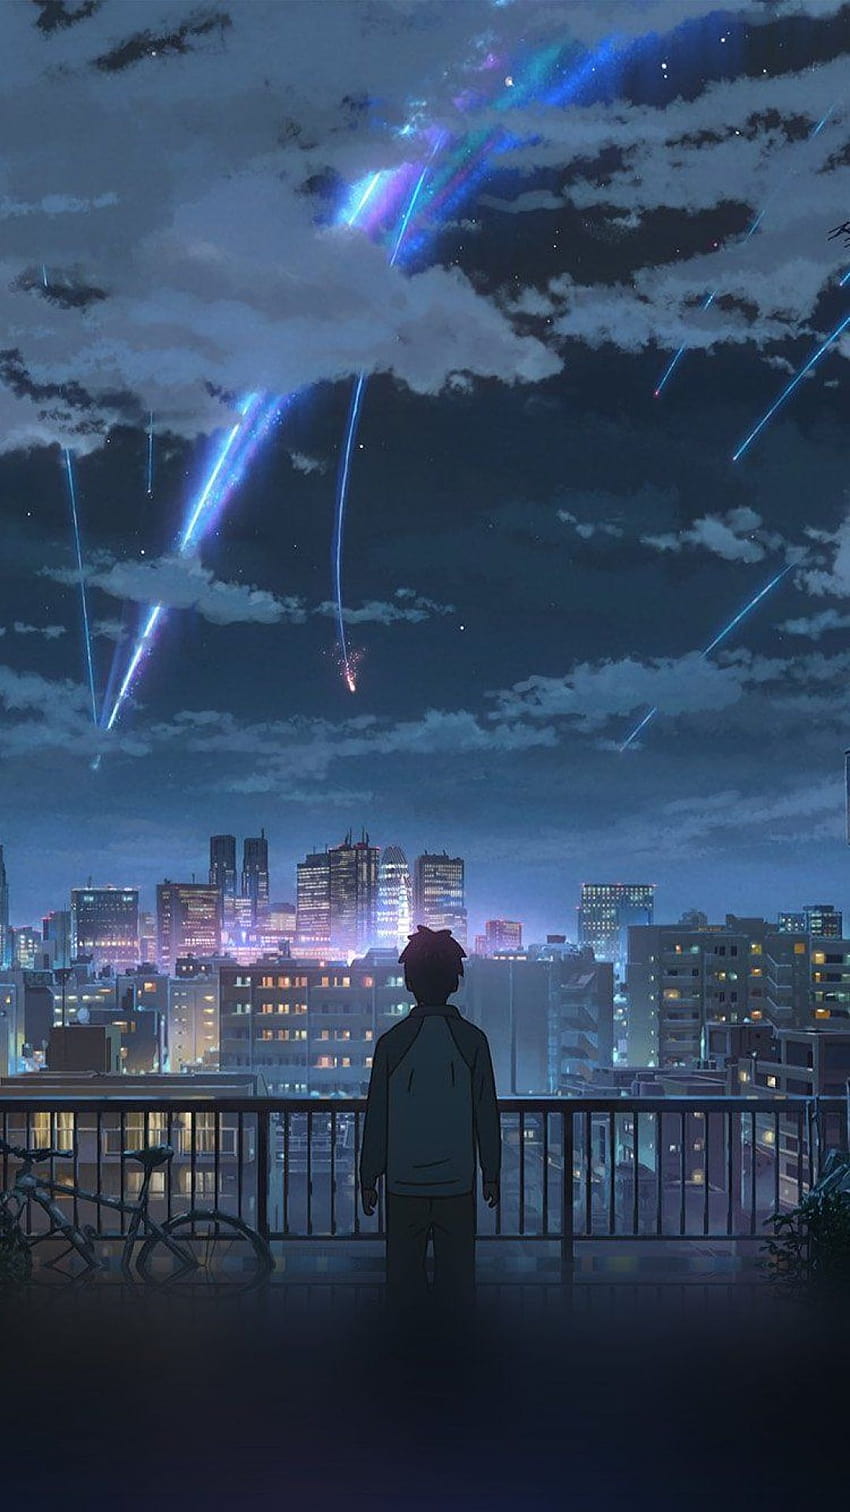 YOURNAME NIGHT ANIME SKY ILLUSTRATION ART IPHONE. Your, sky anime aesthetic HD phone wallpaper